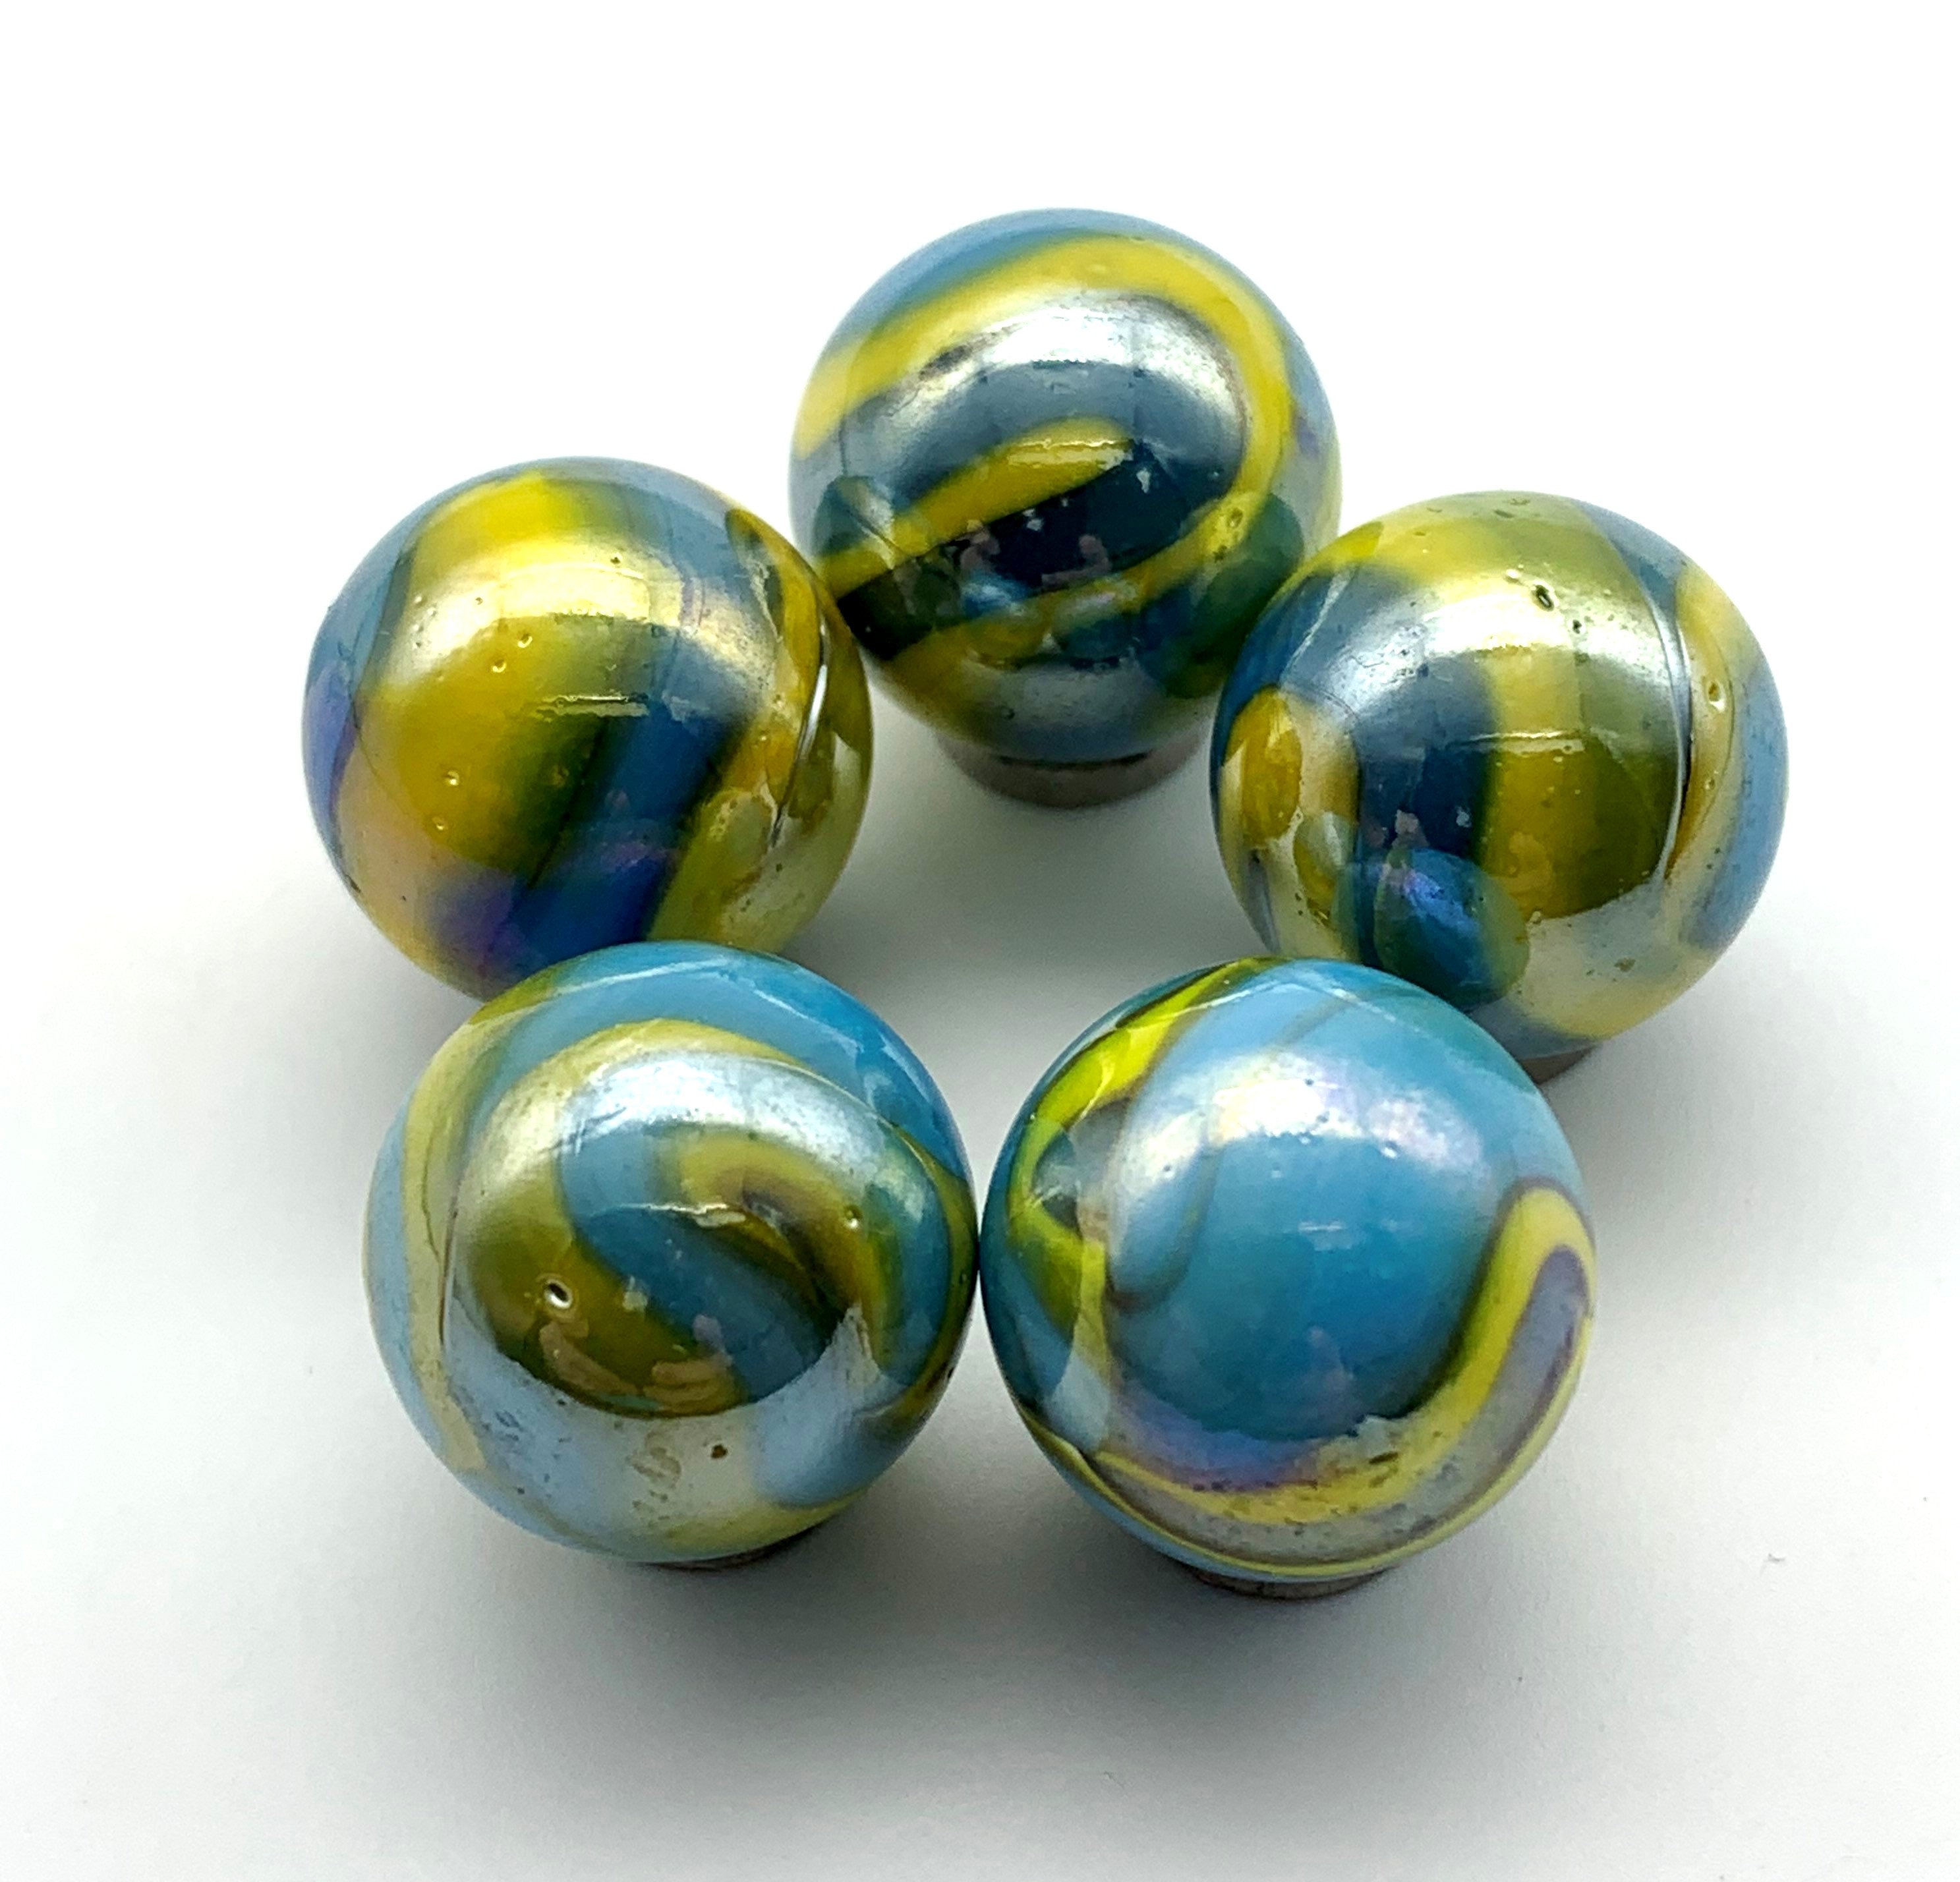 16mm Octopus DC 5/8th" Player Glass Marbles Pk 5 Vacor 2002-07 RETIRED Iridescnt 